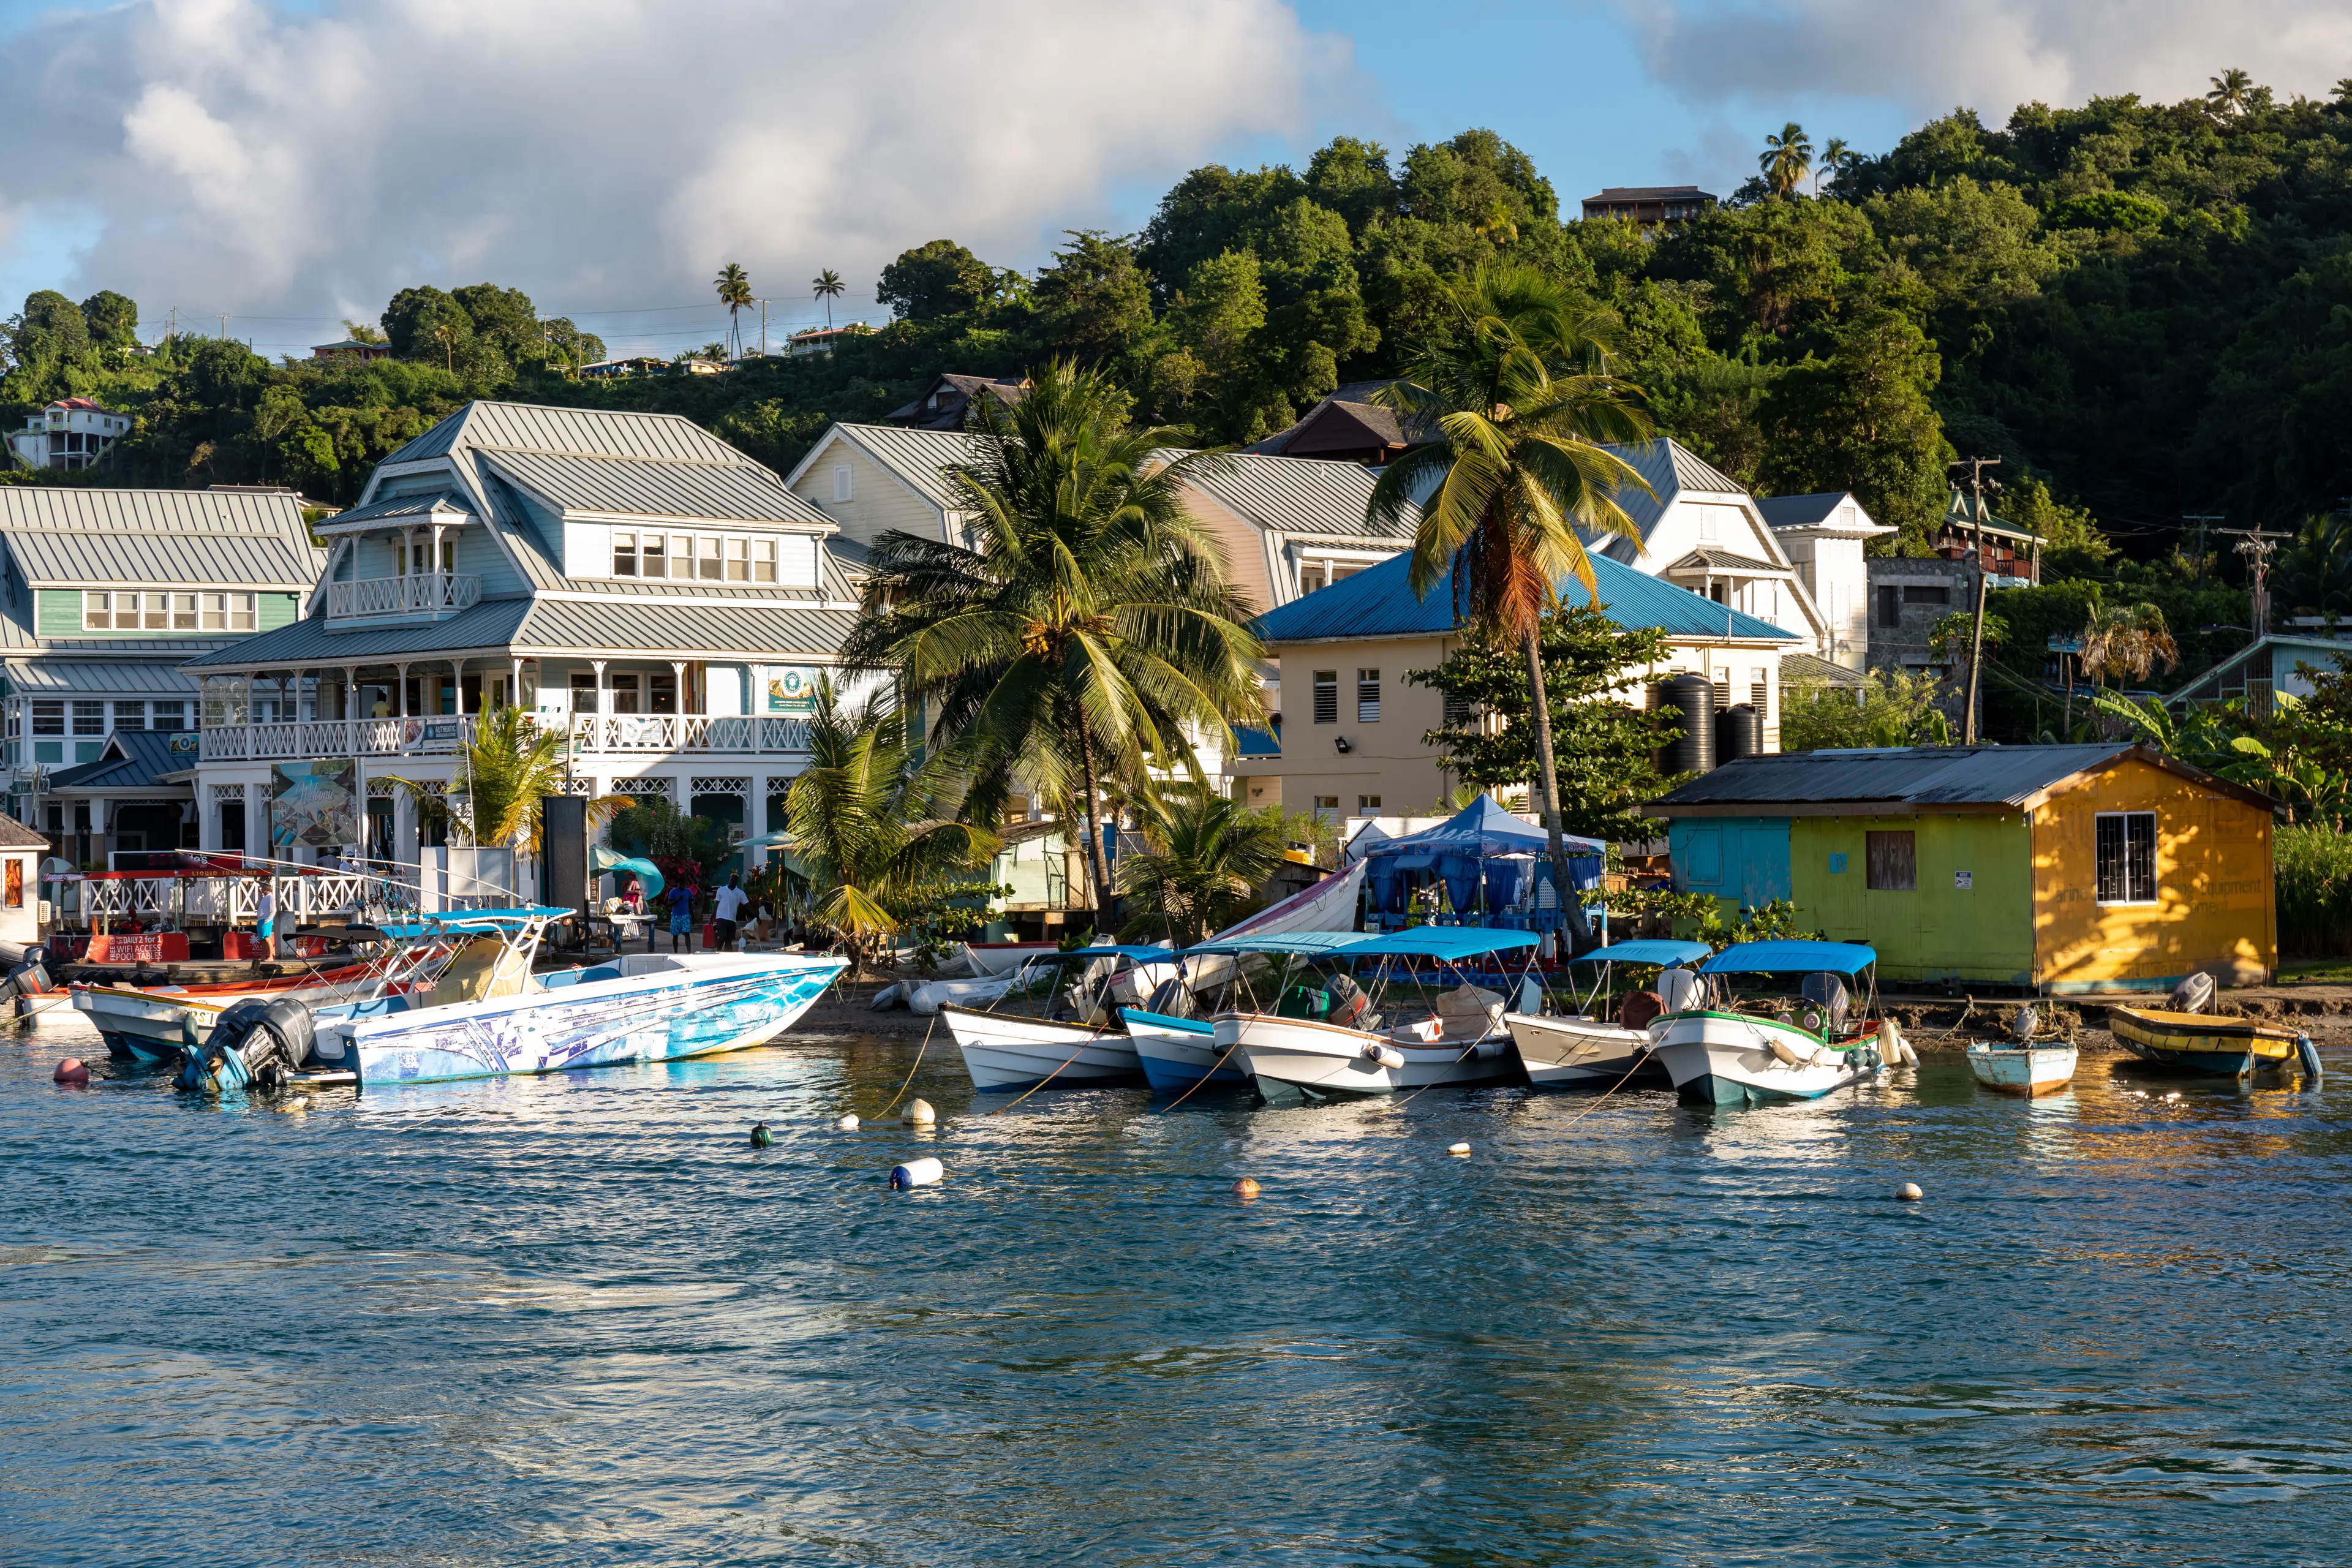 4-Day Saint Lucia Tour: Sightseeing, Shopping & Wine Culinary Delights